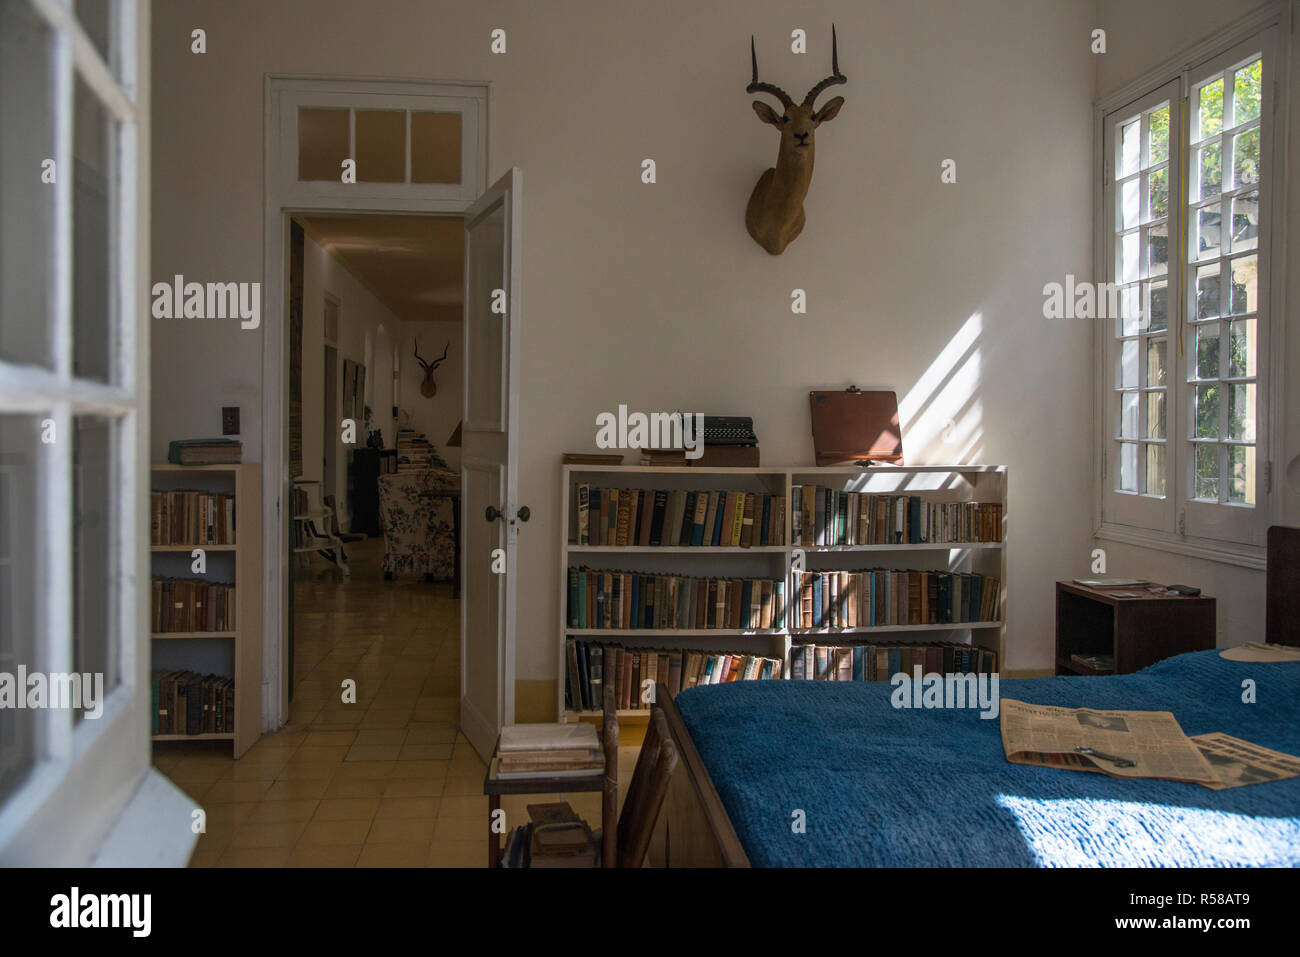 Ernest Hemingway's bedroom and workspace at his home in Cuba. Stock Photo